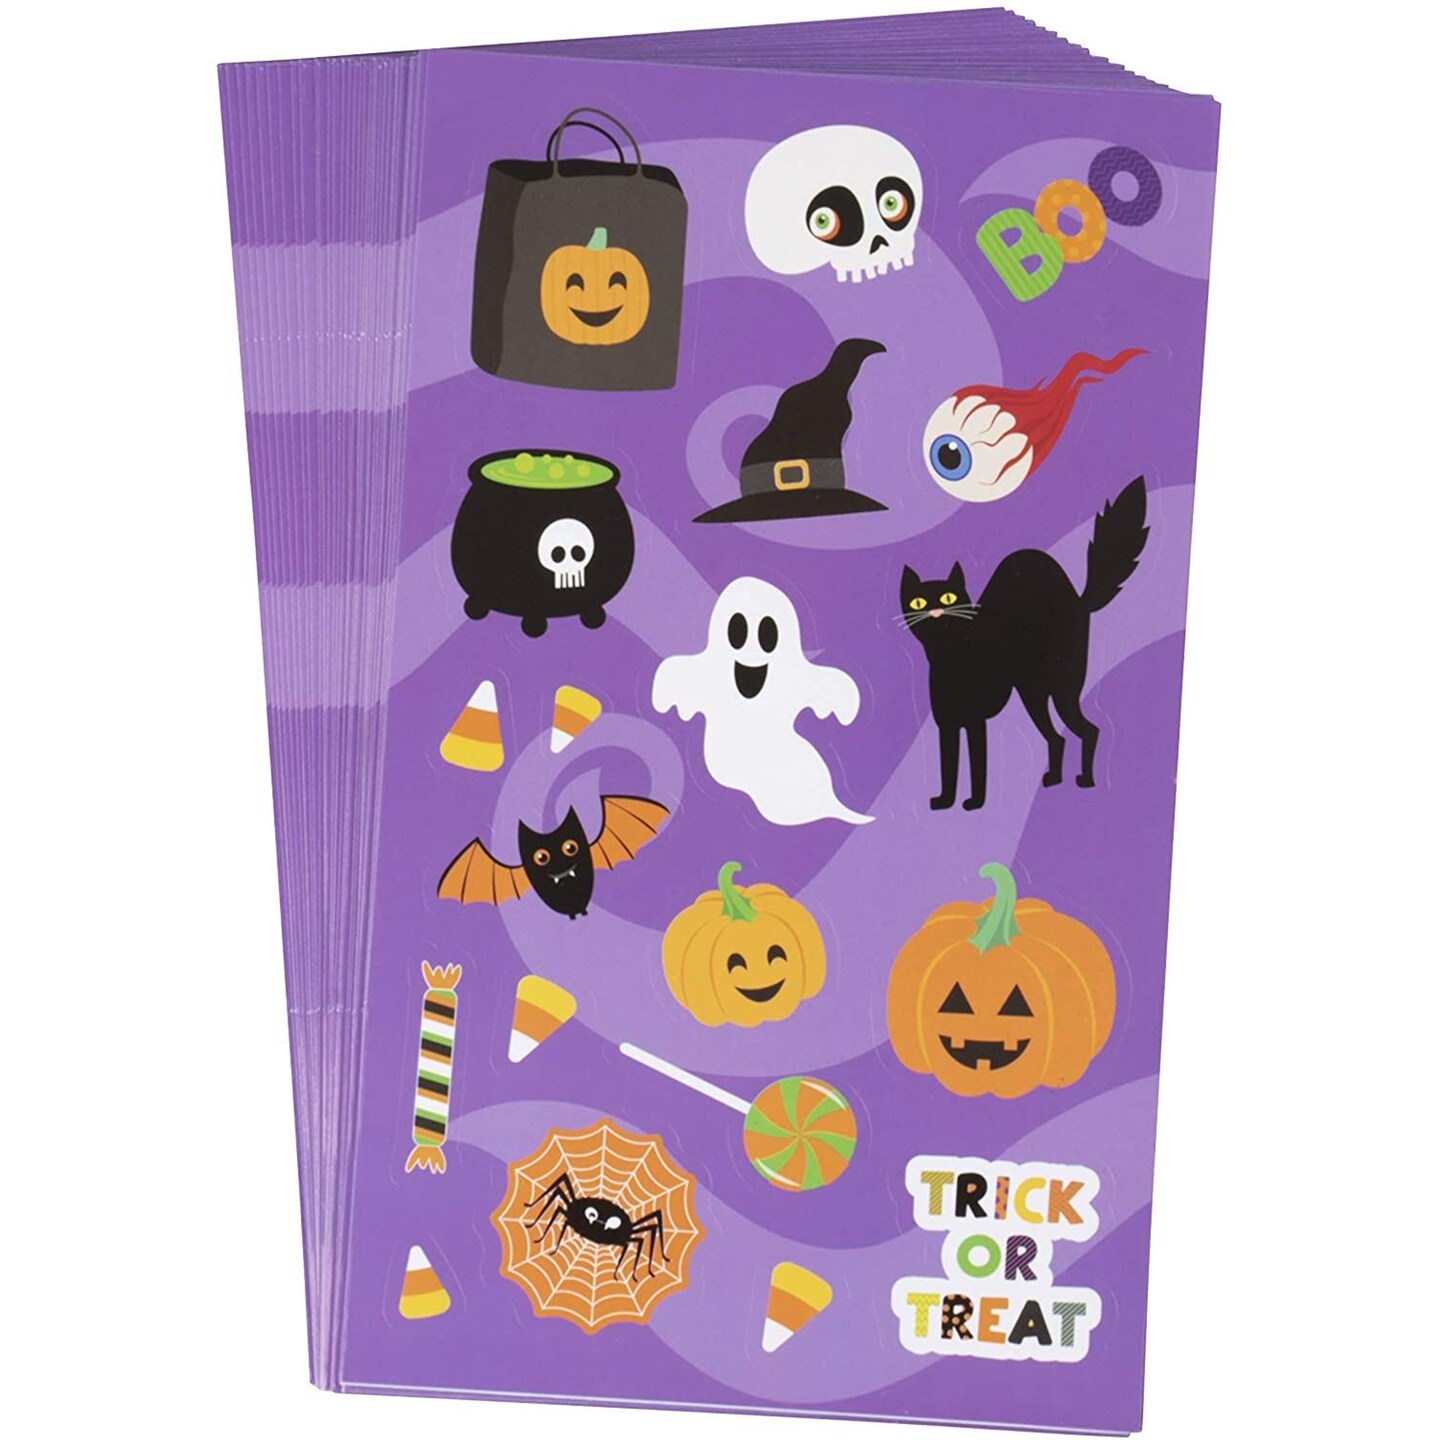 720 Pcs Small Halloween Stickers for Kids, Candy Bags, Party, Trick-or-Treat Buckets Decorations Favors , 36 Sheets